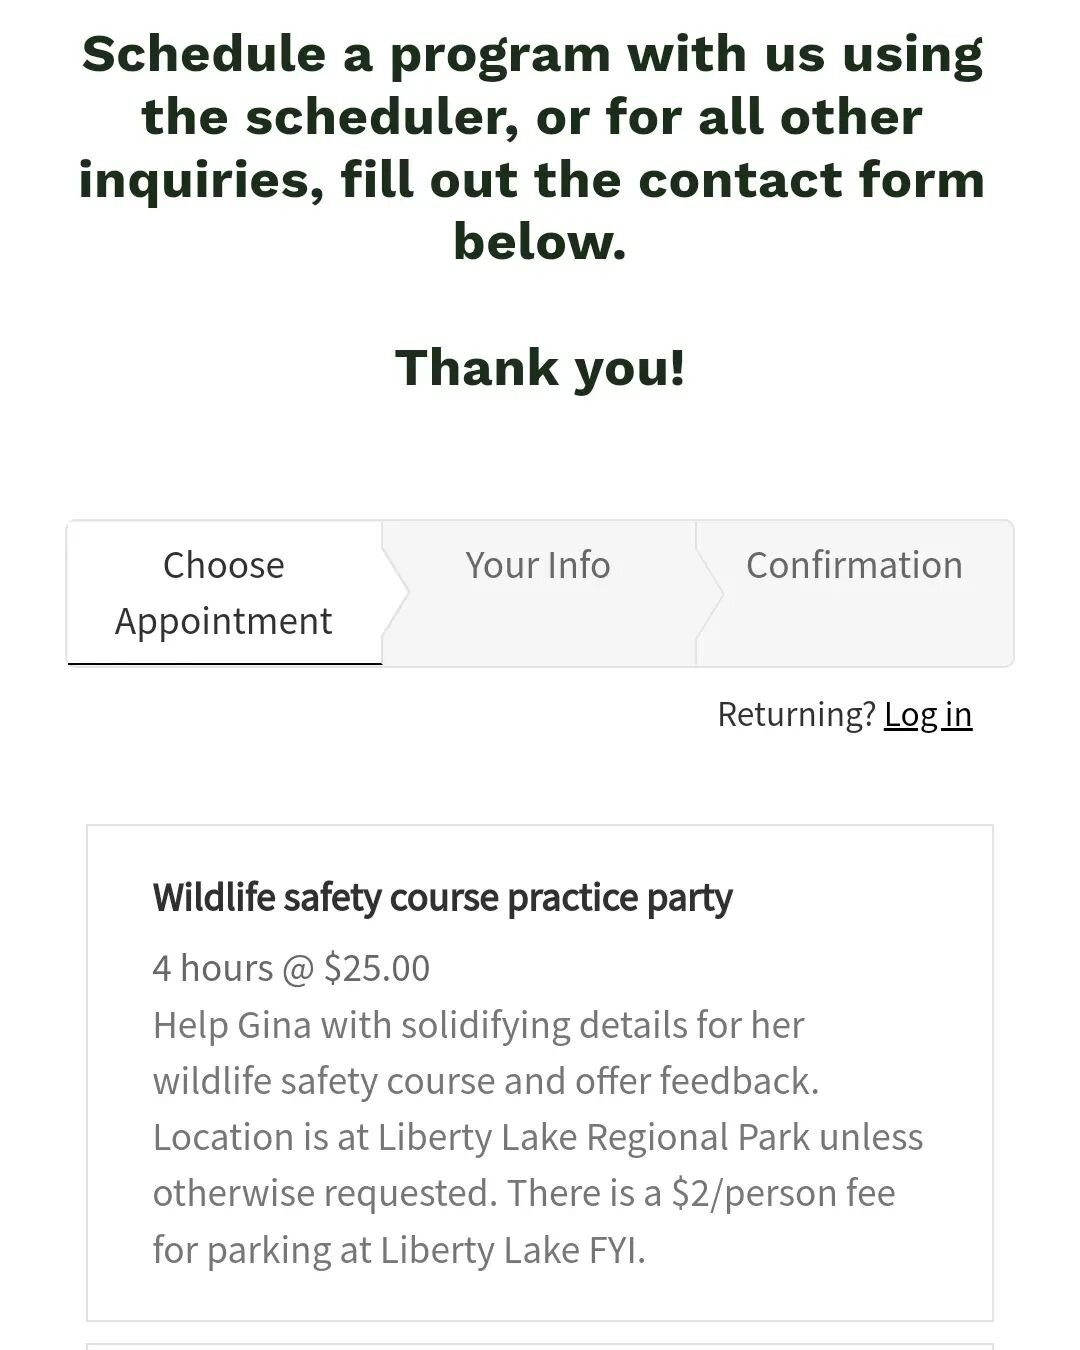 Gina has created a slew of &quot;practice parties&quot; throughout September for her wildlife safety course where you get a discounted rate of $25 and help her solidify details of what the course will look like. Go to our website and click &quot;Sche